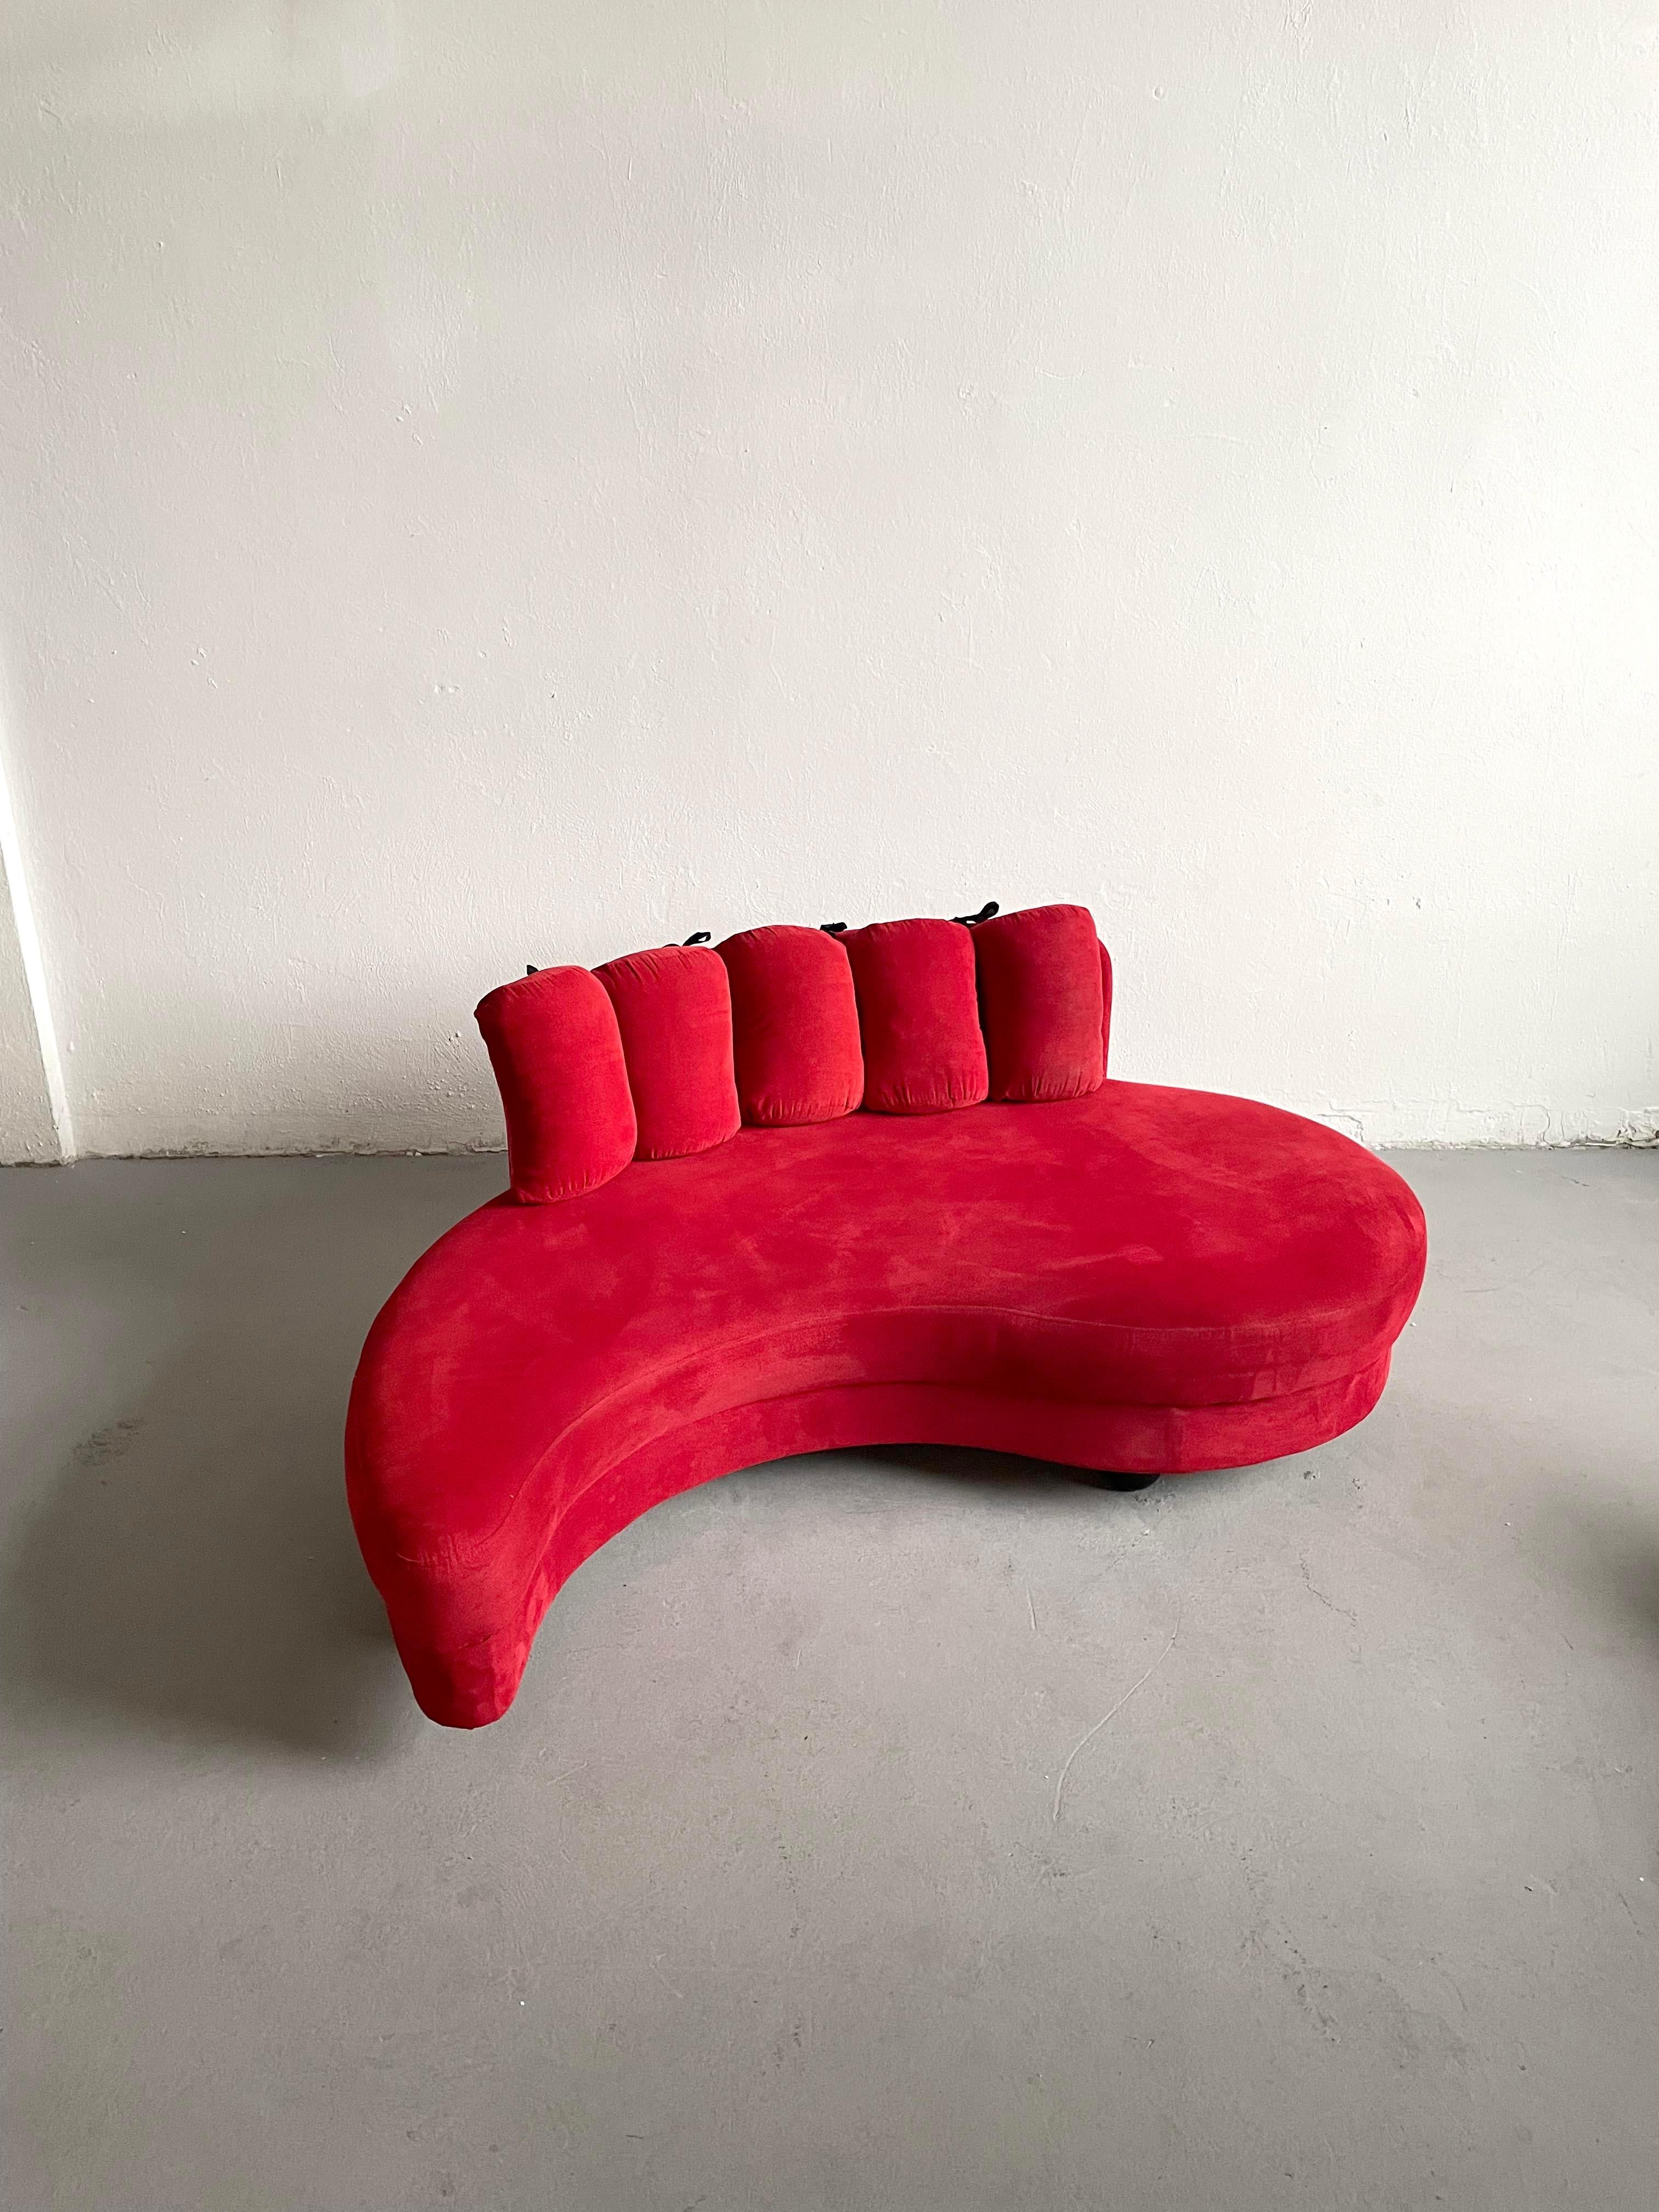 Set of 2 Postmodern Curved Yin-Yang Shaped Sofa Daybeds in Red Fabric, c 1980s In Good Condition For Sale In Zagreb, HR